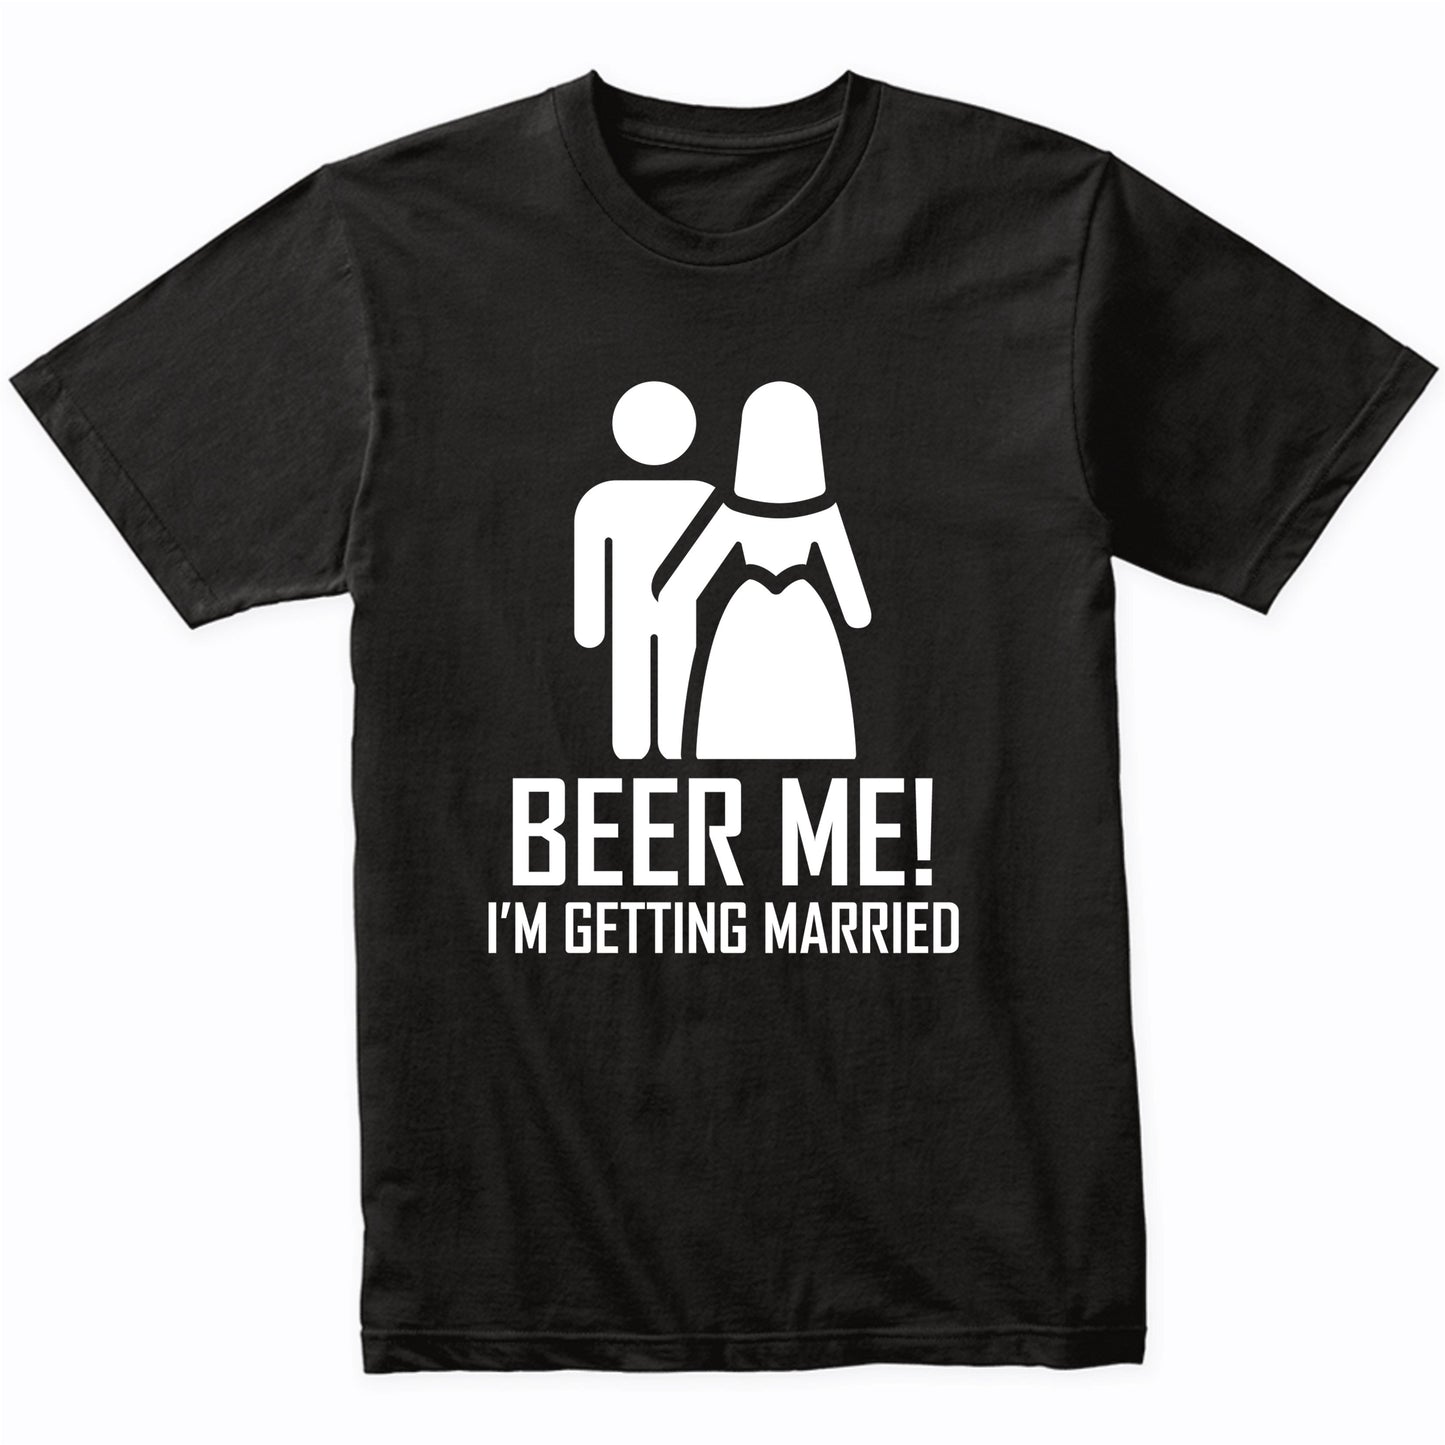 Funny Bachelor Party Shirt Beer Me I'm Getting Married